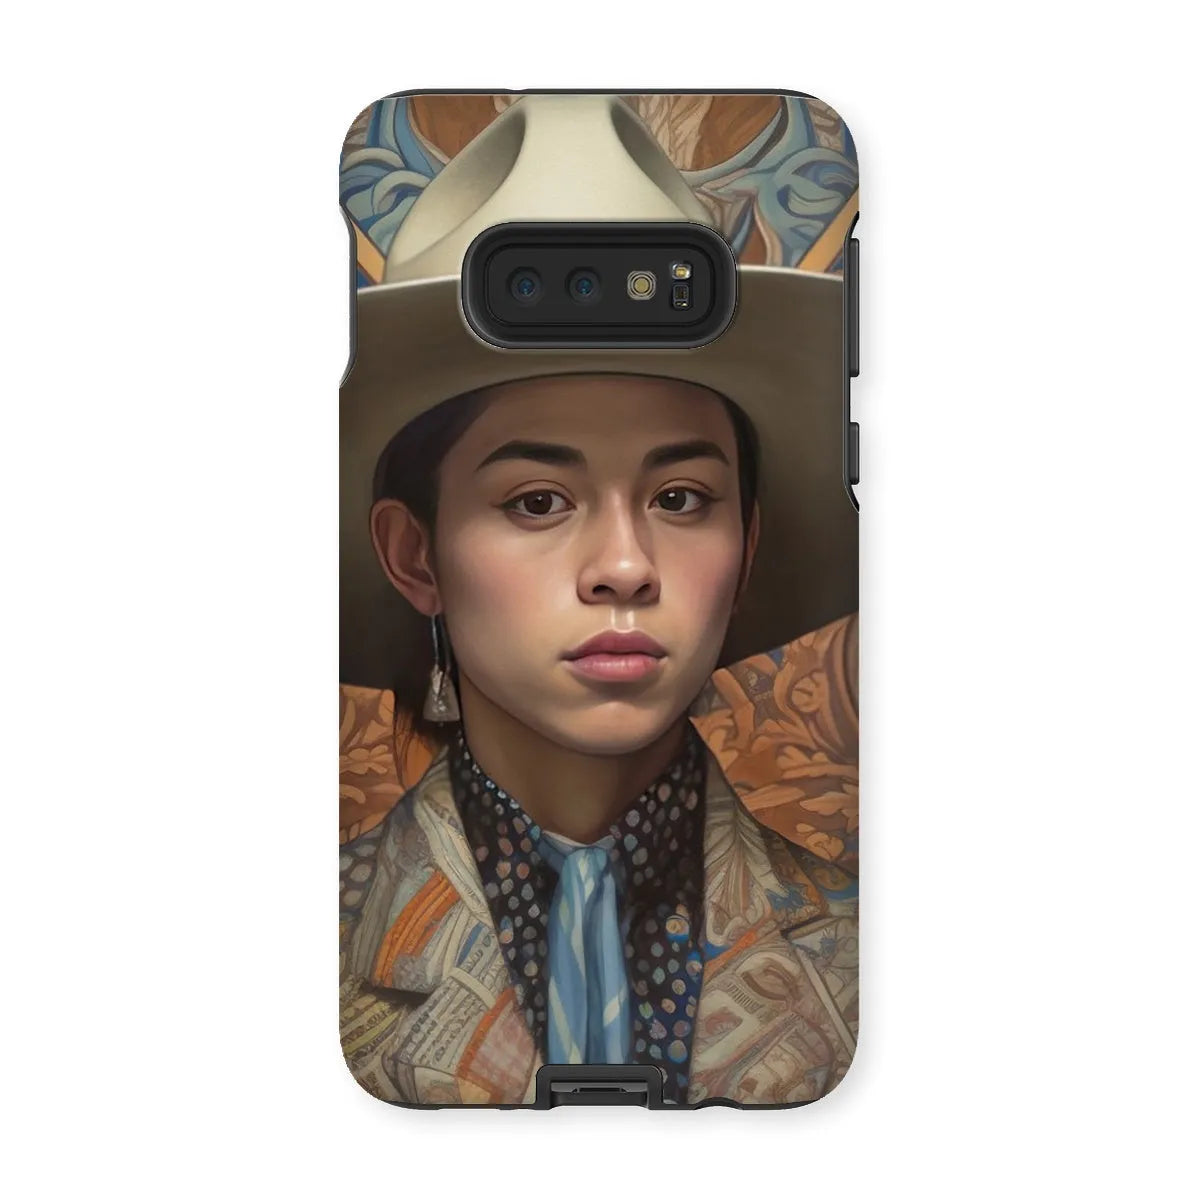 Angel The Transgender Cowboy - F2m Outlaw Art Phone Case - Samsung Galaxy S10e / Matte - Mobile Phone Cases - Aesthetic